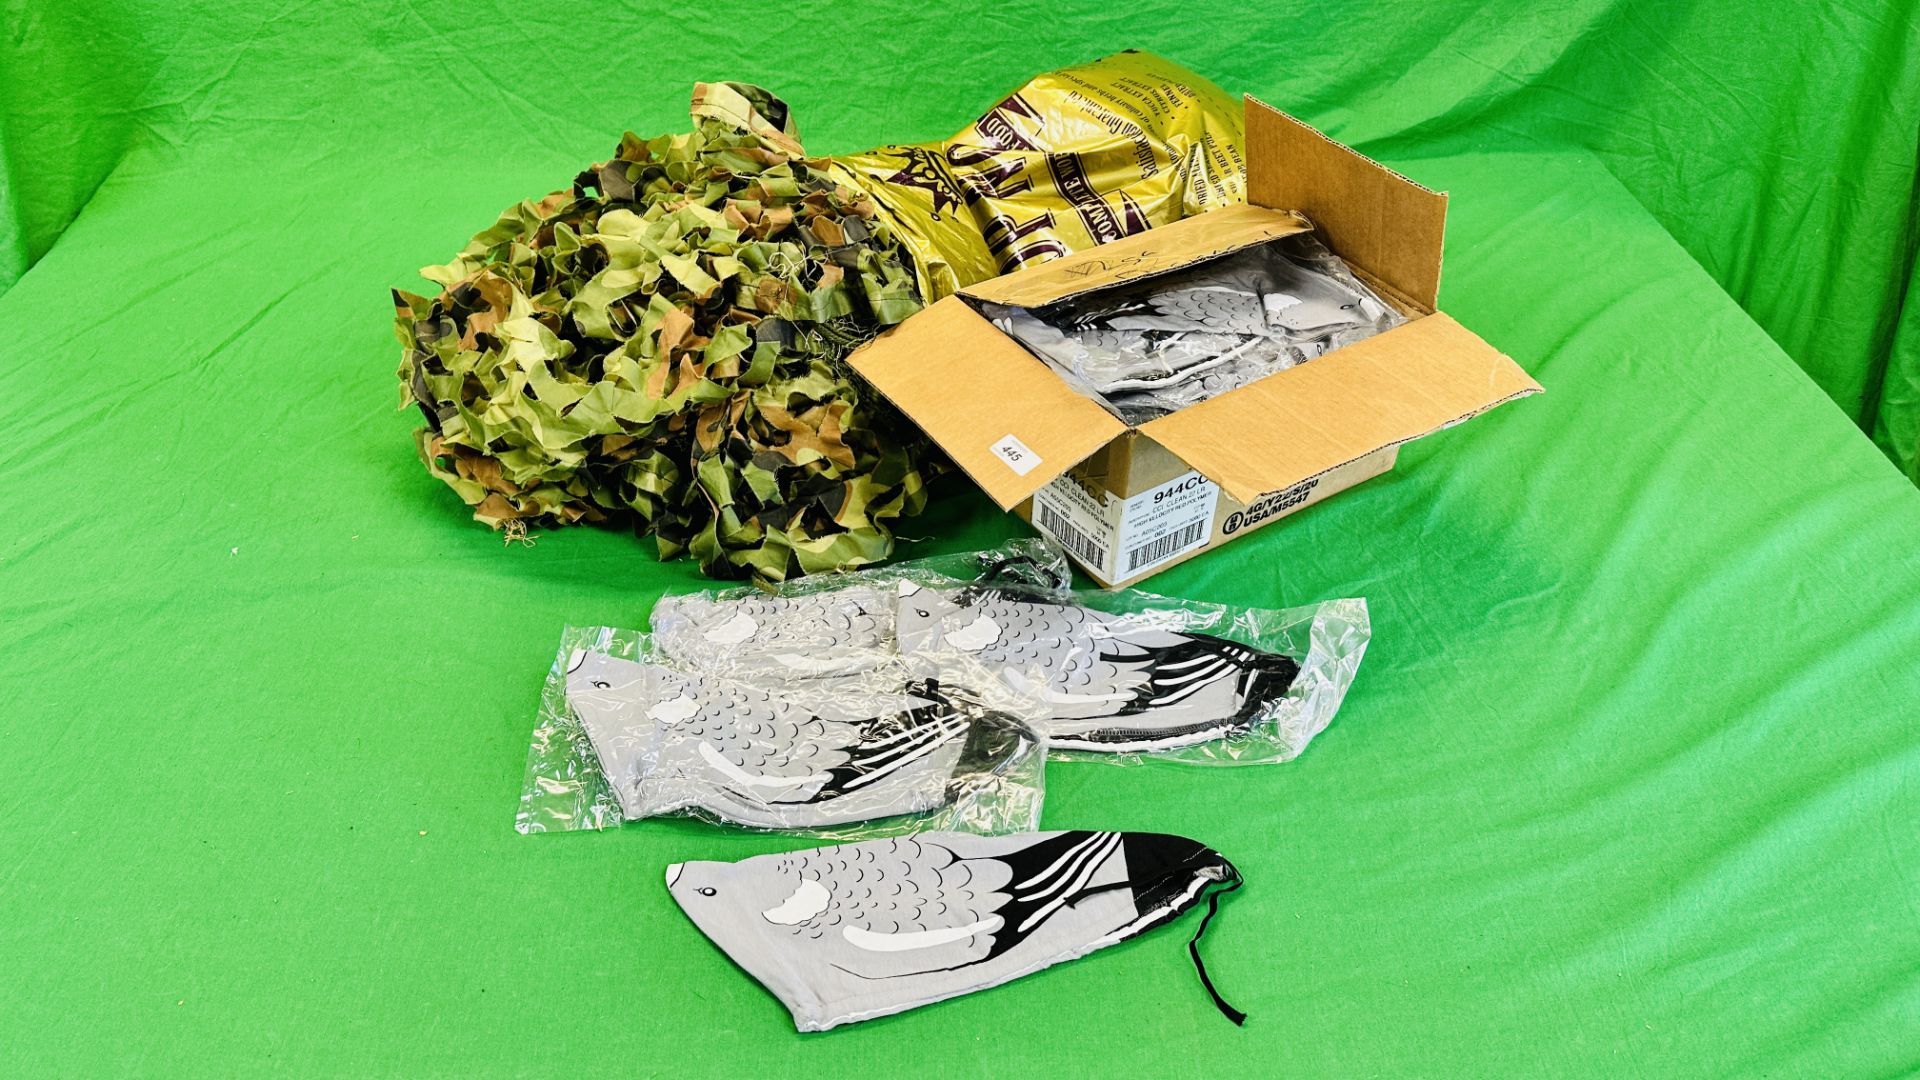 TWO CAMOUFLAGE NETS + A BOX OF AS NEW FABRIC PIGEON DECOY OVER SOCKS.